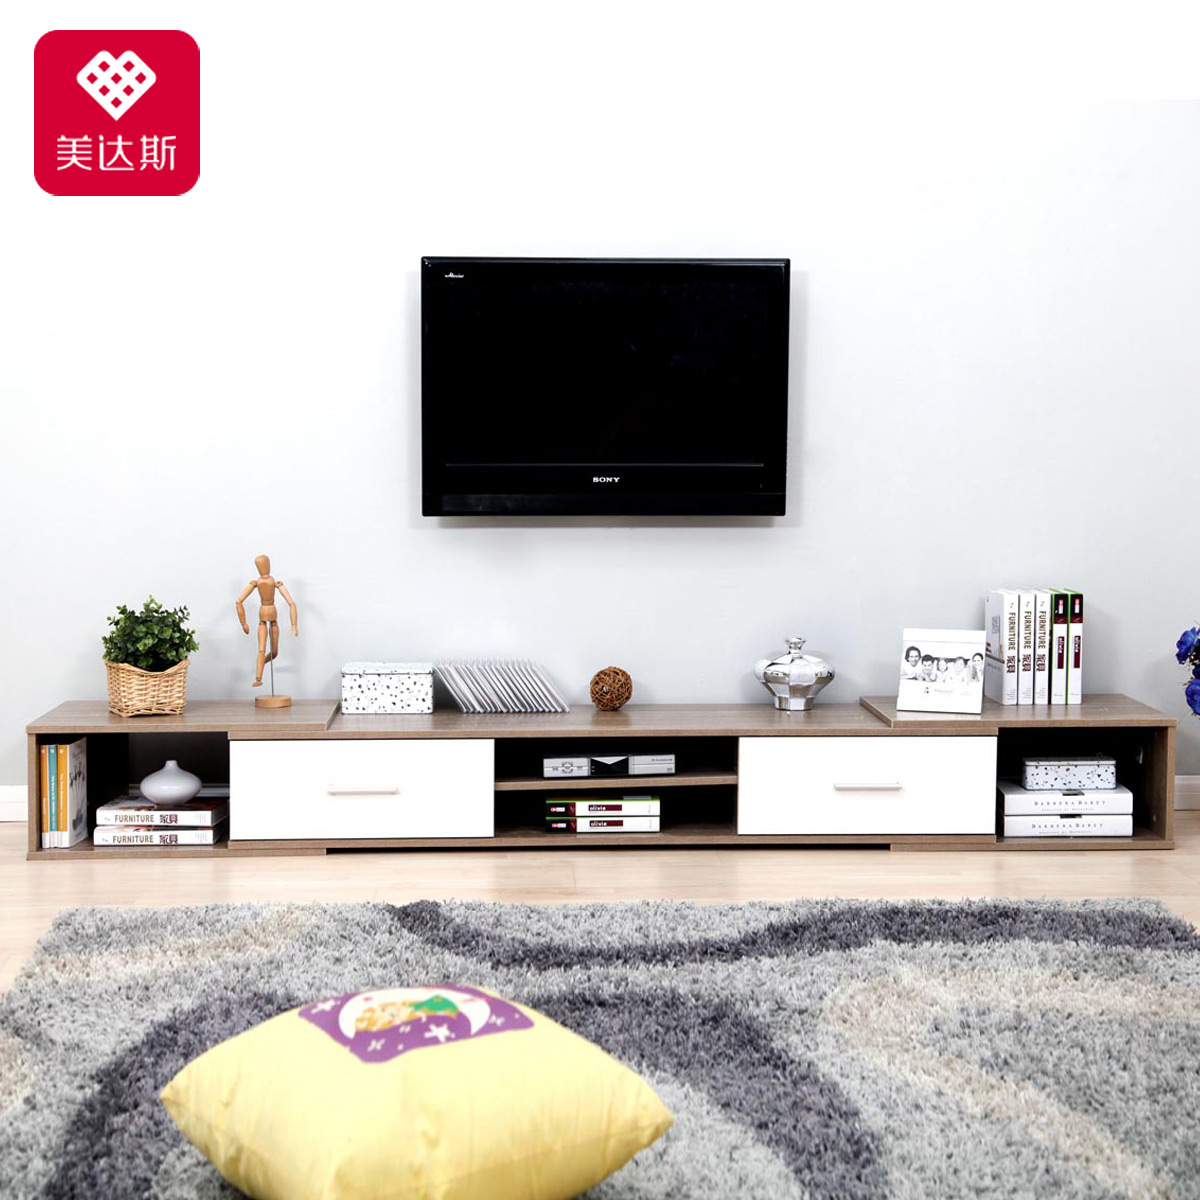 Buy Us Das Tv Cabinet Tv Cabinet Living Room Coffee Table